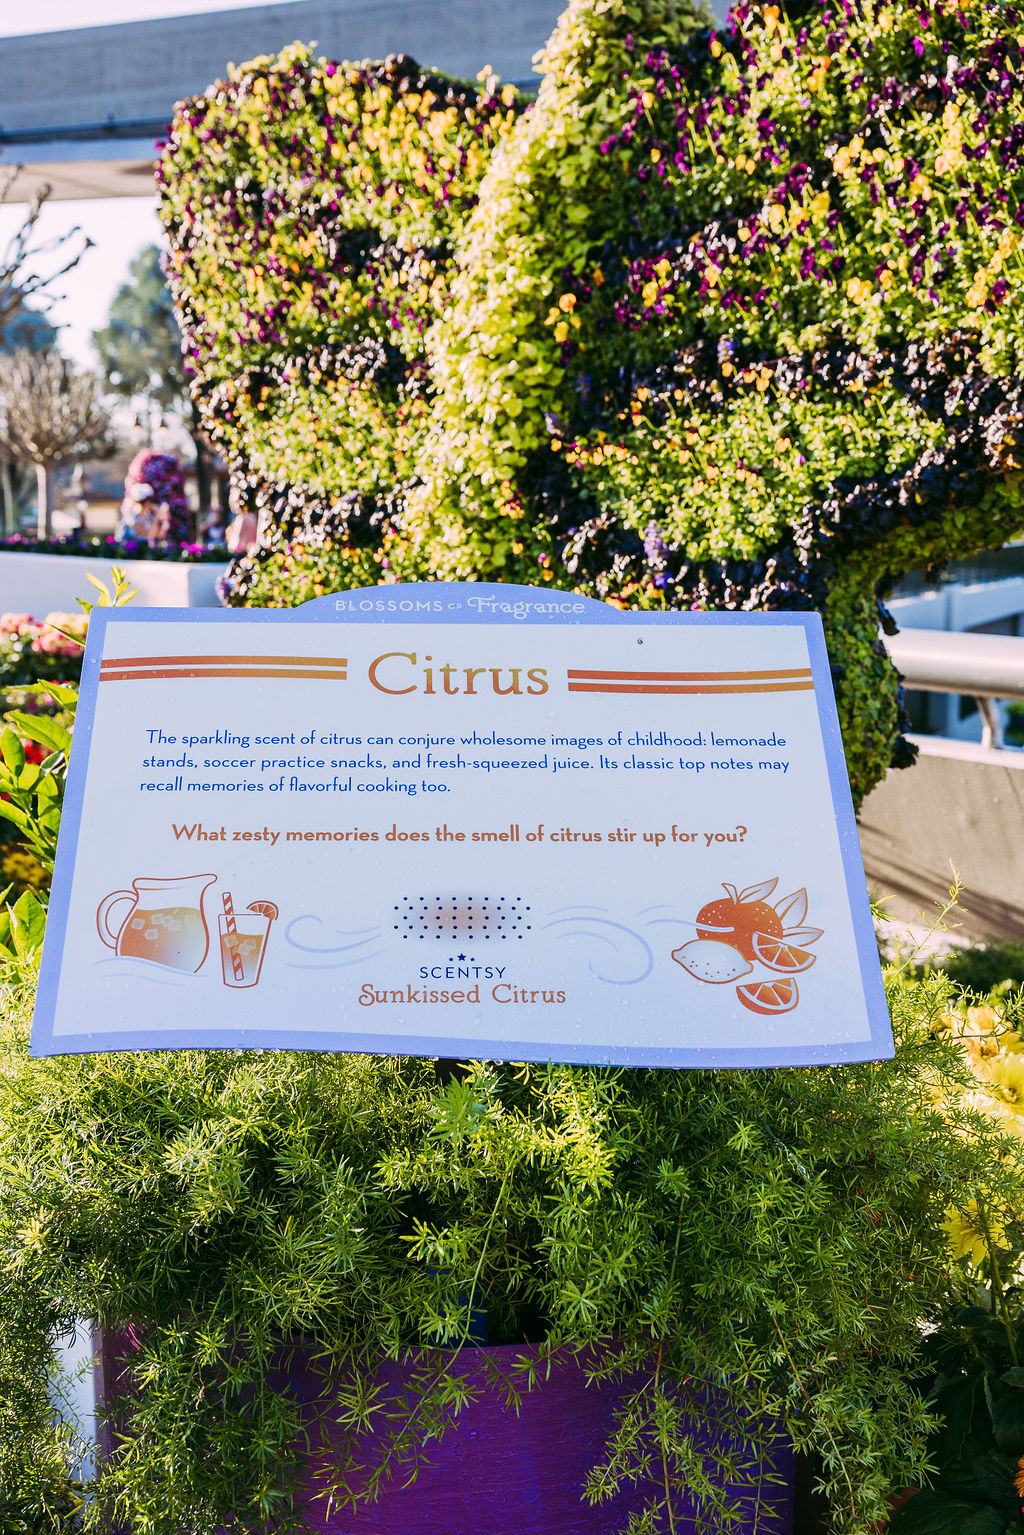 NEW at EPCOT Flower and Garden festival 2022